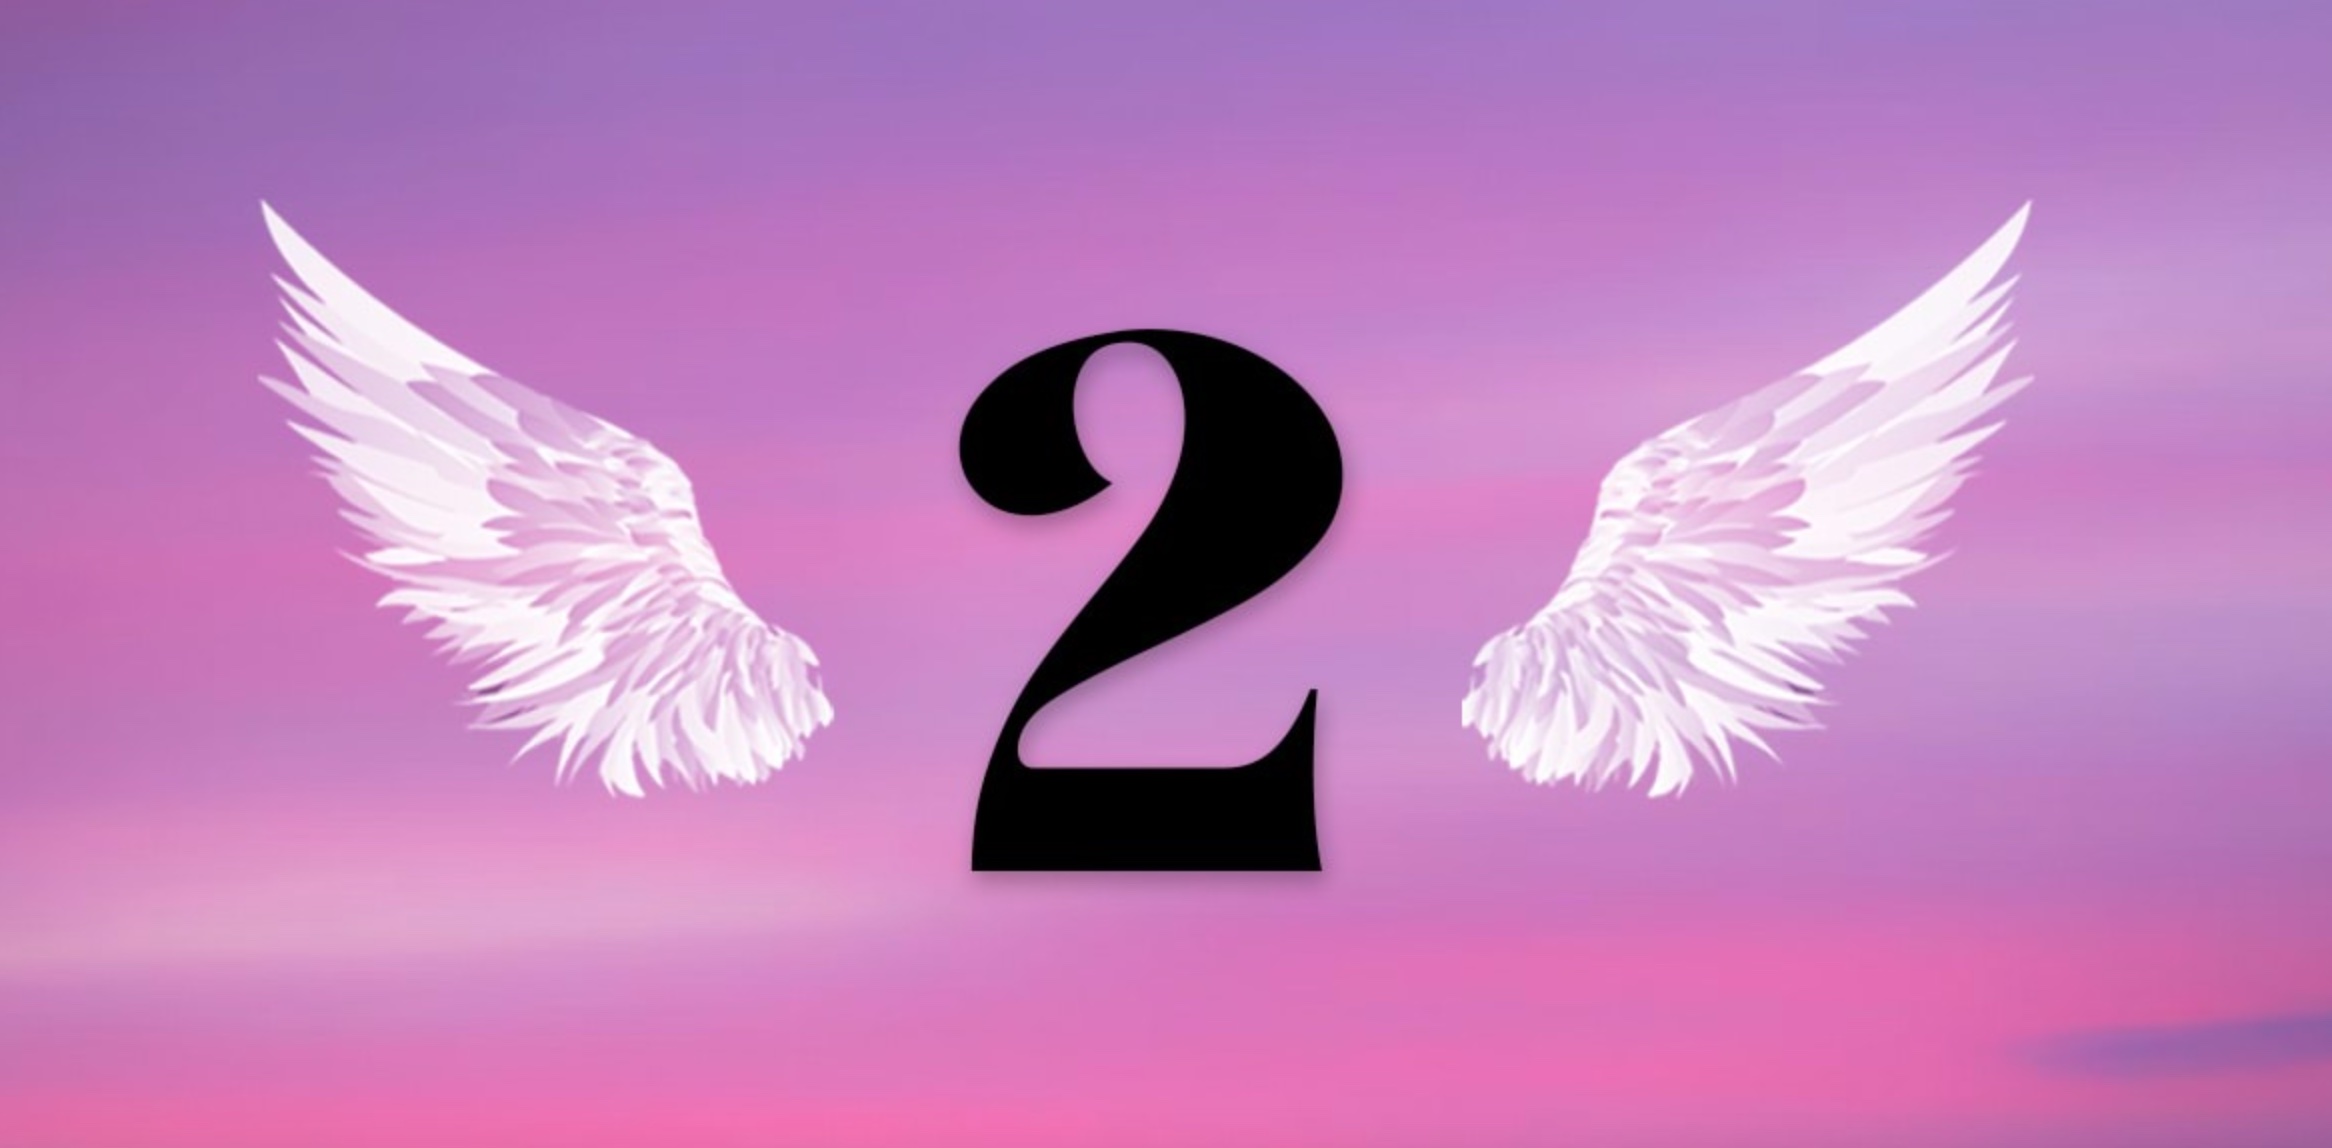 The Numerology and Symbolism of Angel Number 2 - Sarah Scoop